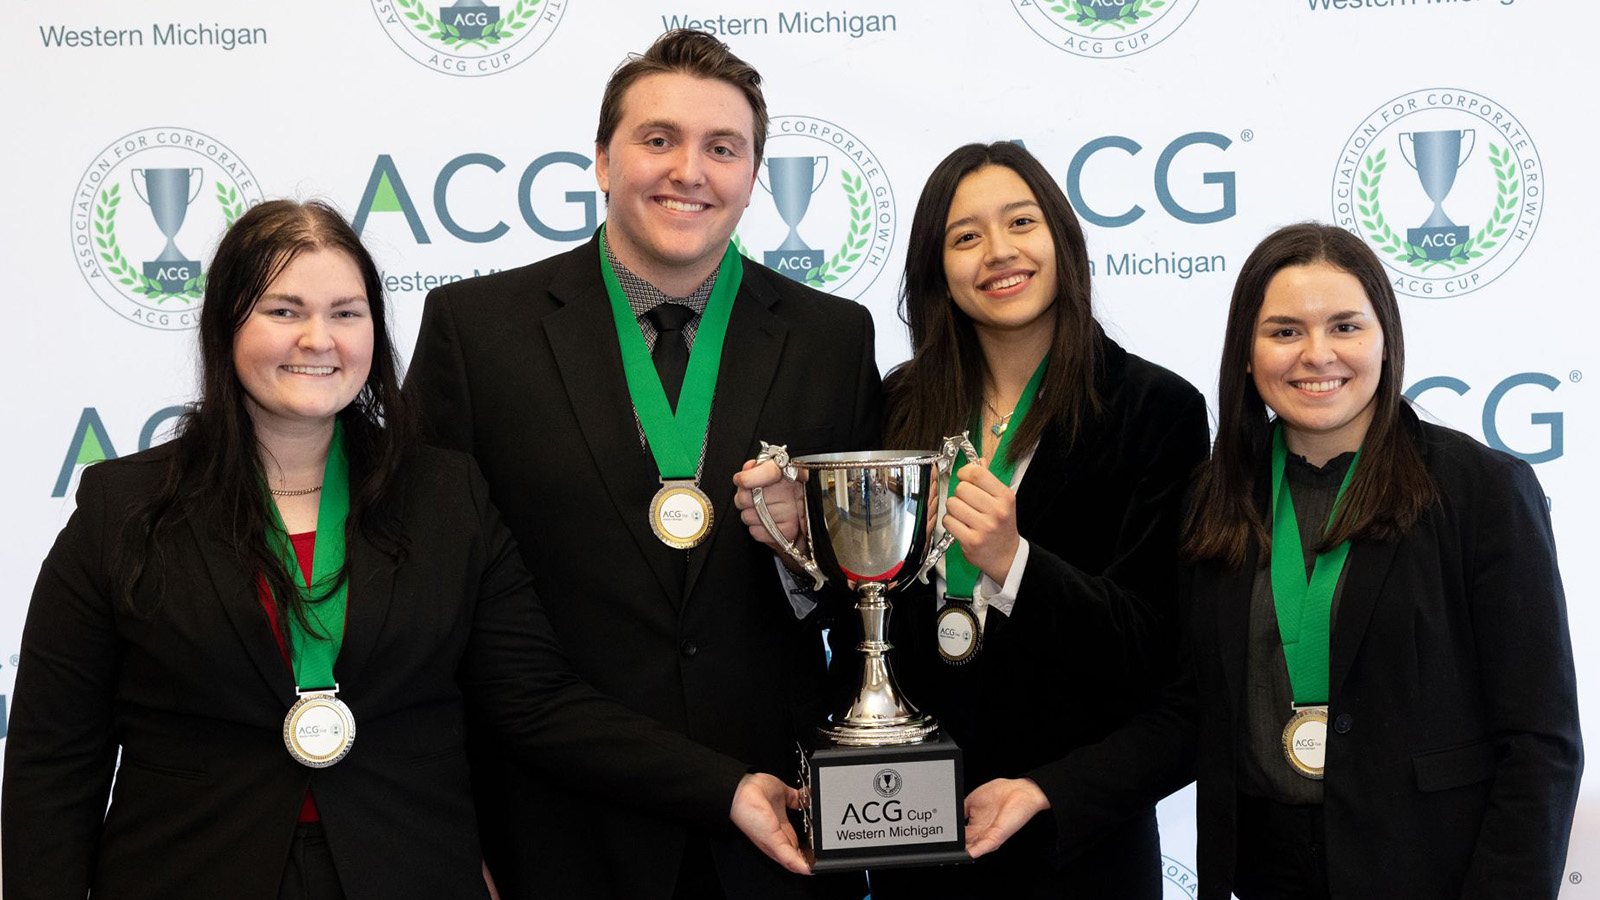 ACG Cup winning team (L to R) Lucy Forlastro, Jackson Raymond, Carolina Hernandez Ruiz and Corinne Sleeter. They are professionally dressed, wearing their new medals, and holding the ACG Cup in front of the ACG Banner.